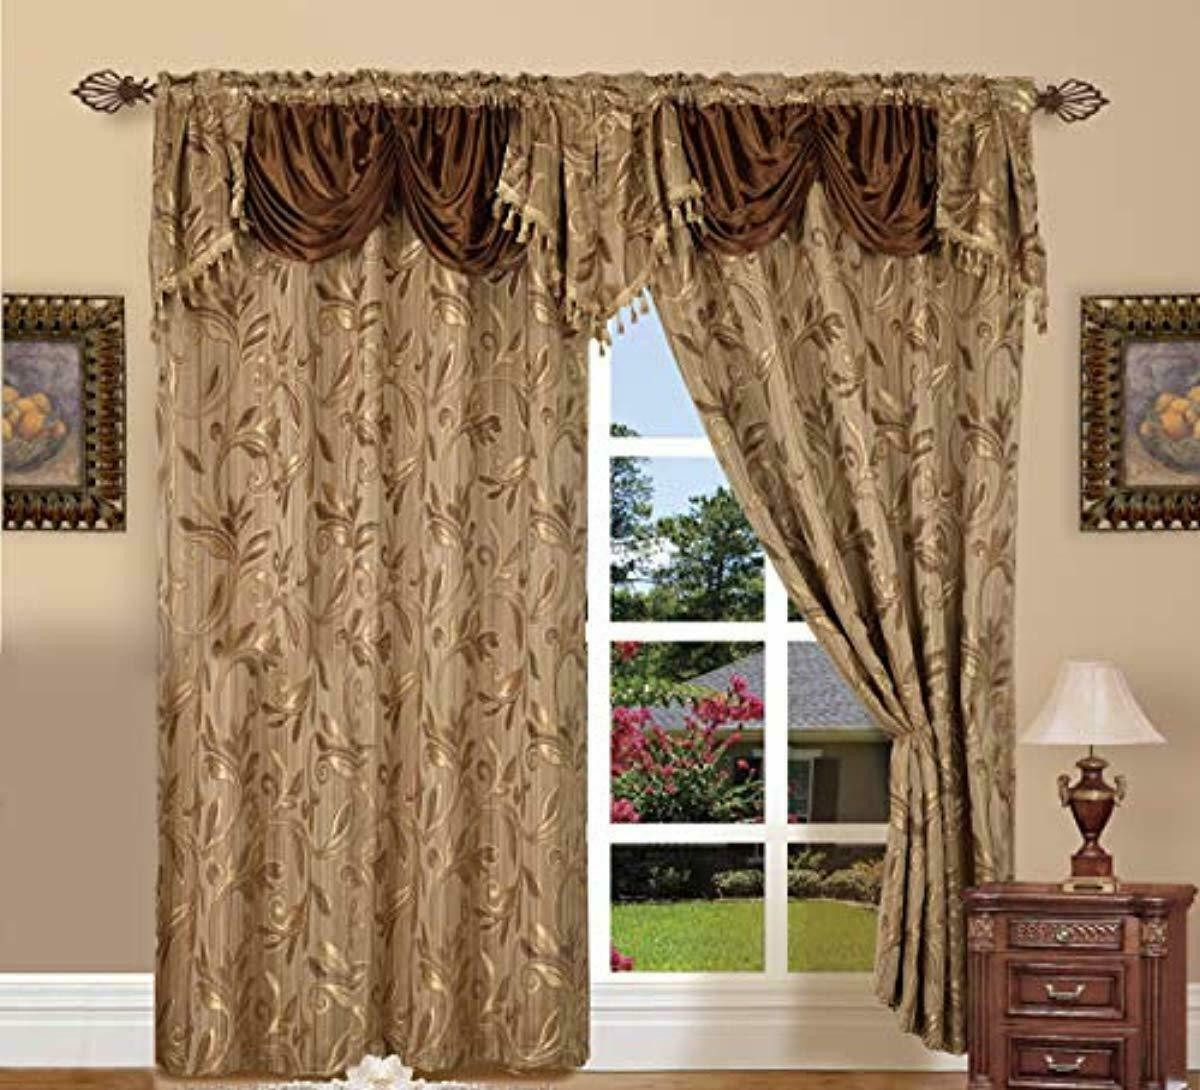 Long Curtains For Living Room
 Window Curtains Curtain Panels Drapes For Living Room 84